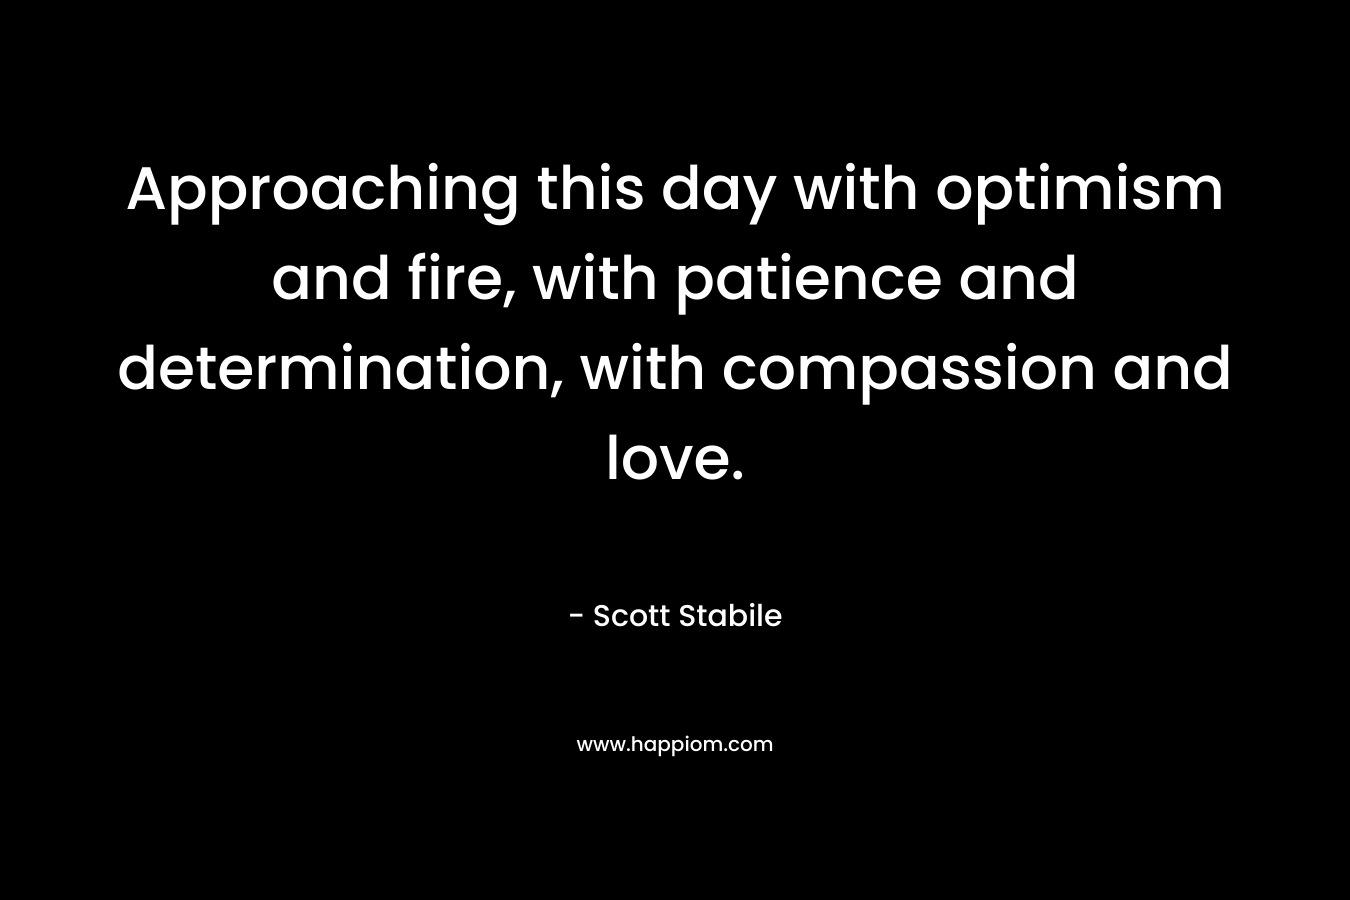 Approaching this day with optimism and fire, with patience and determination, with compassion and love.